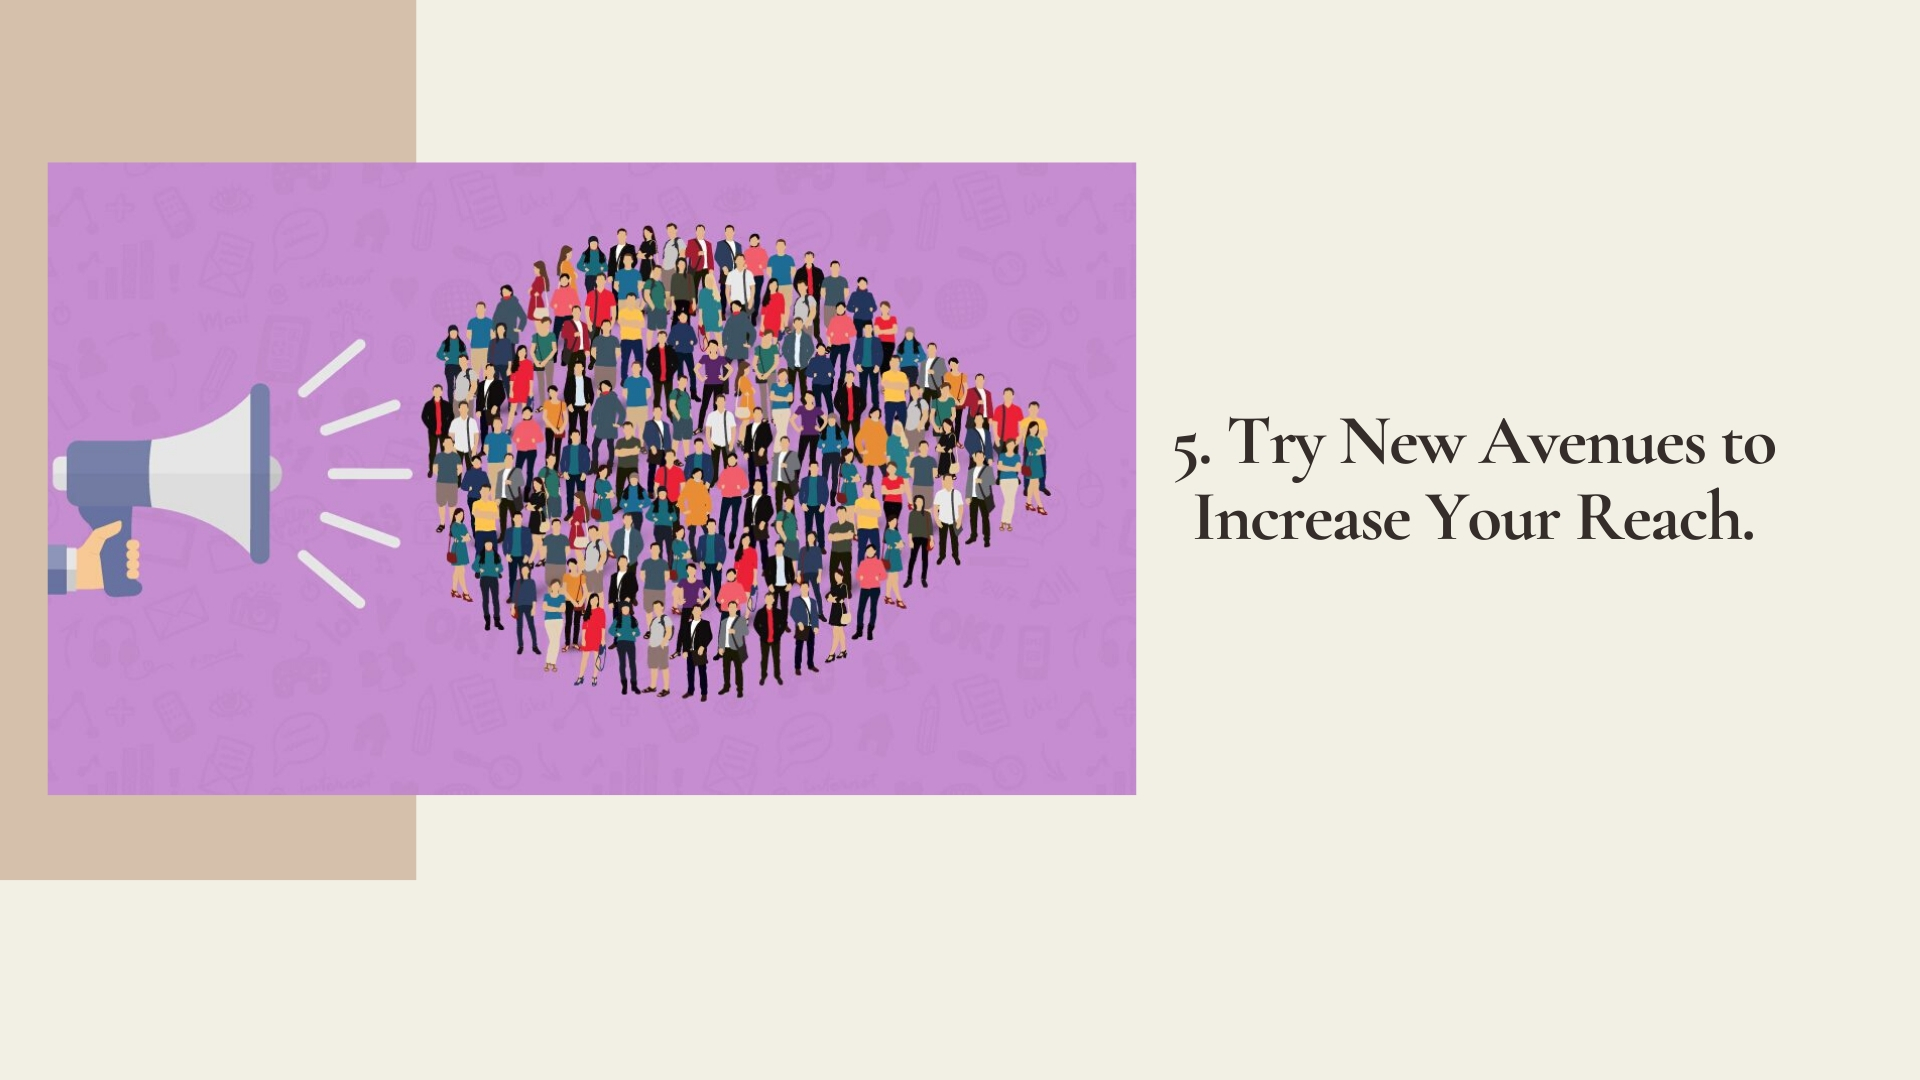 5. Try New Avenues to Increase Your Reach.